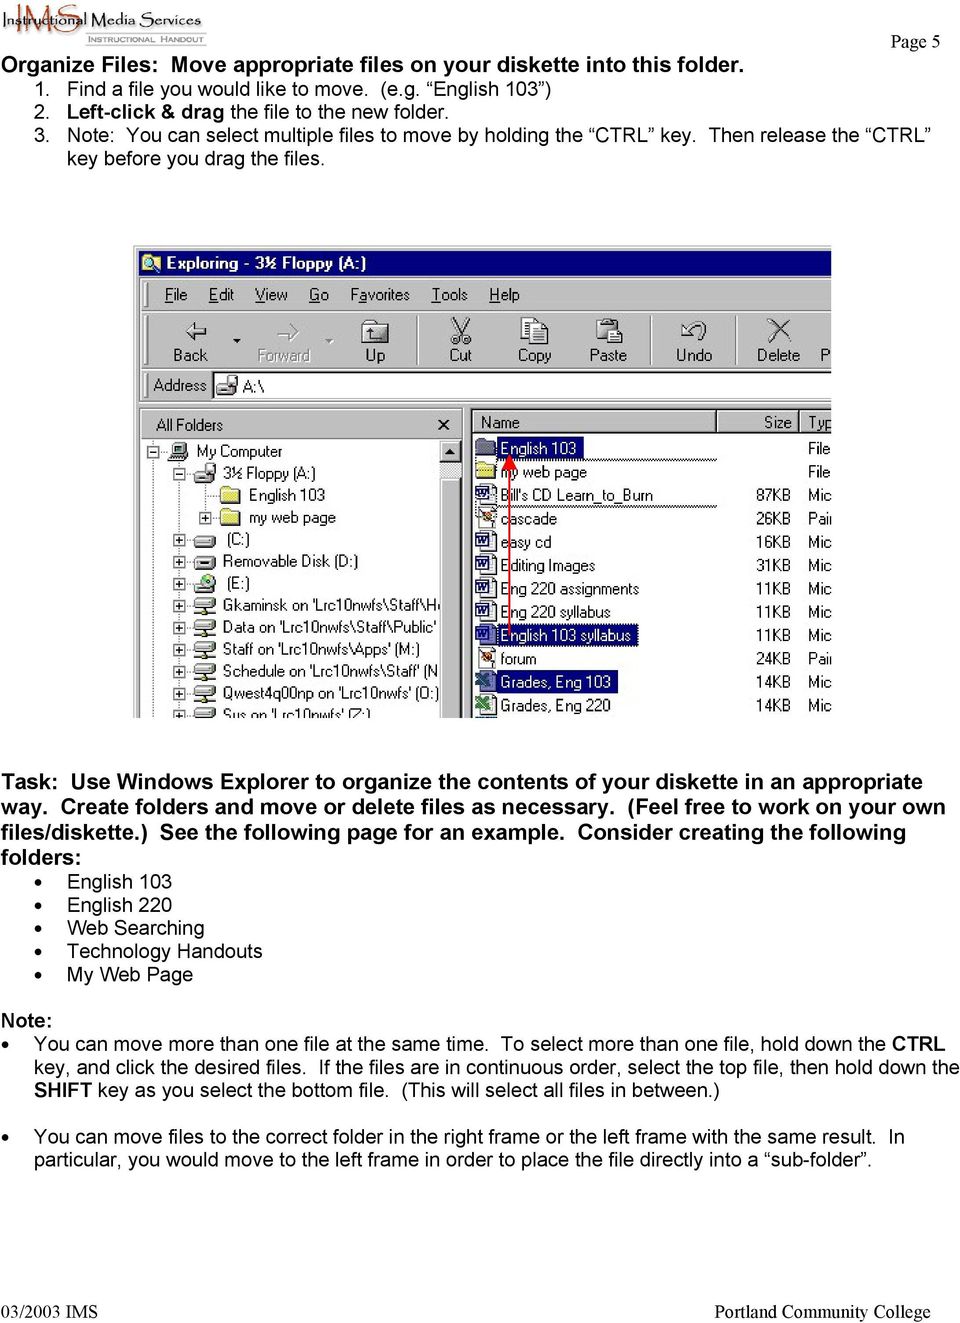 Task: Use Windows Explorer to organize the contents of your diskette in an appropriate way. Create folders and move or delete files as necessary. (Feel free to work on your own files/diskette.